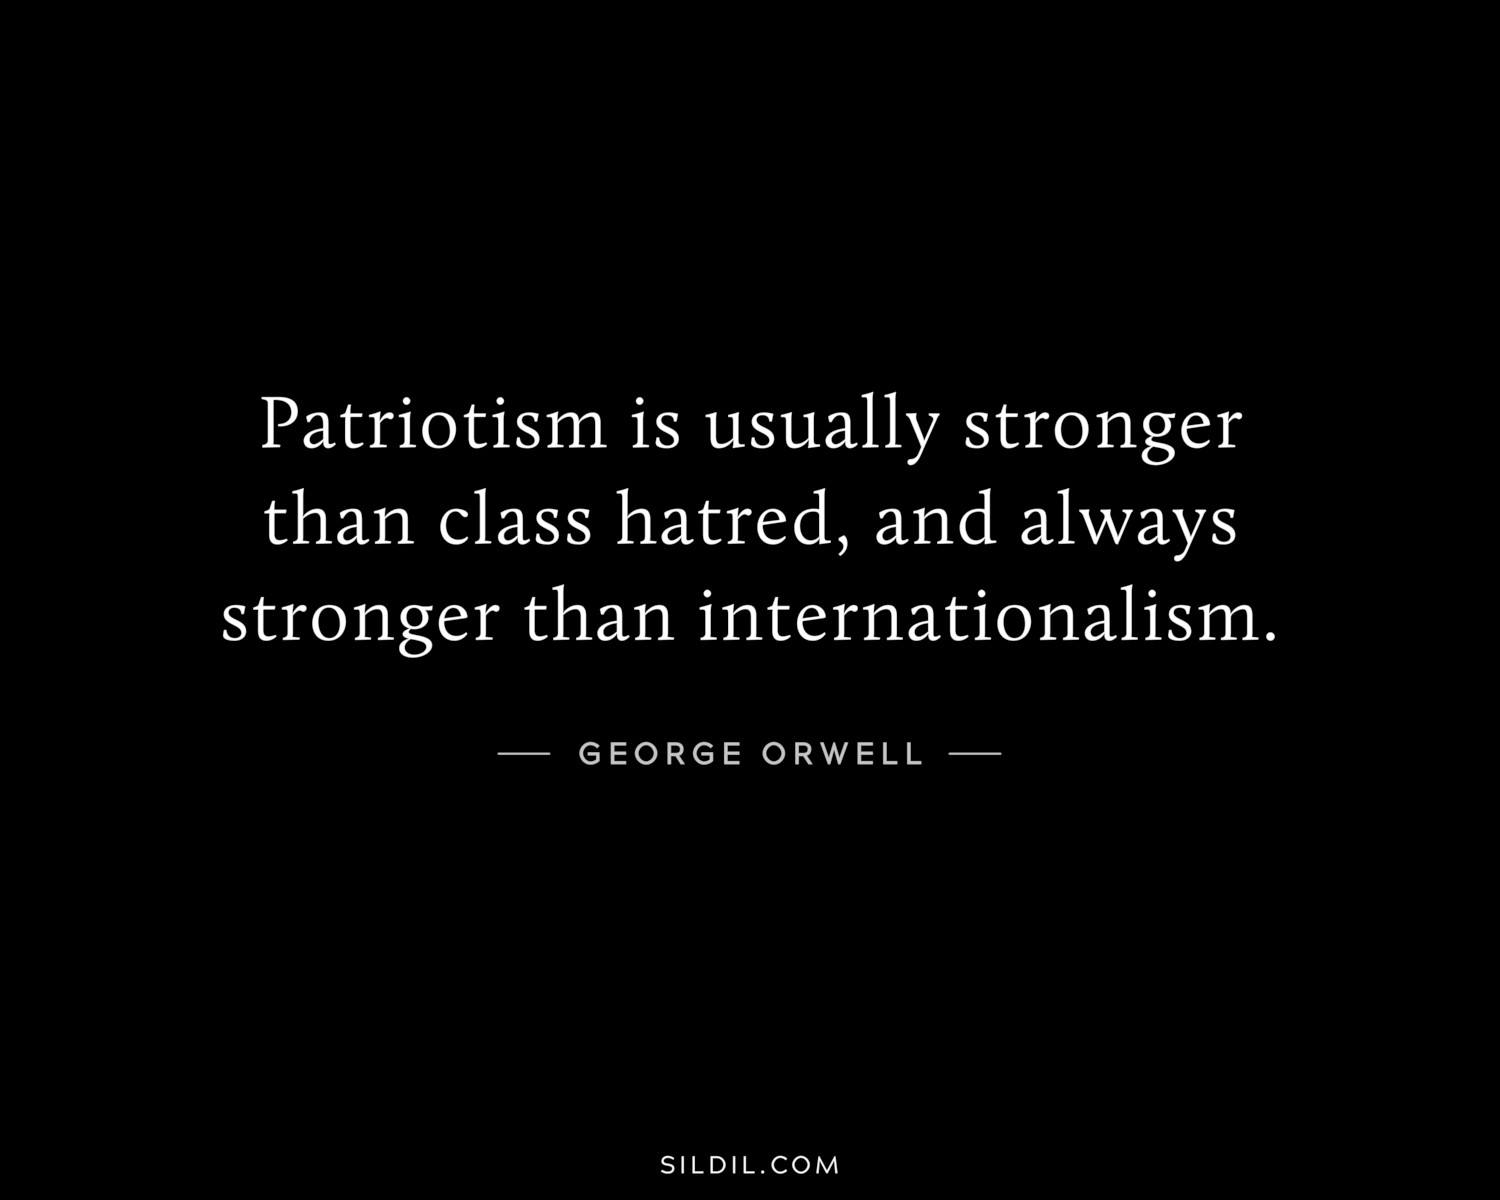 Patriotism is usually stronger than class hatred, and always stronger than internationalism.